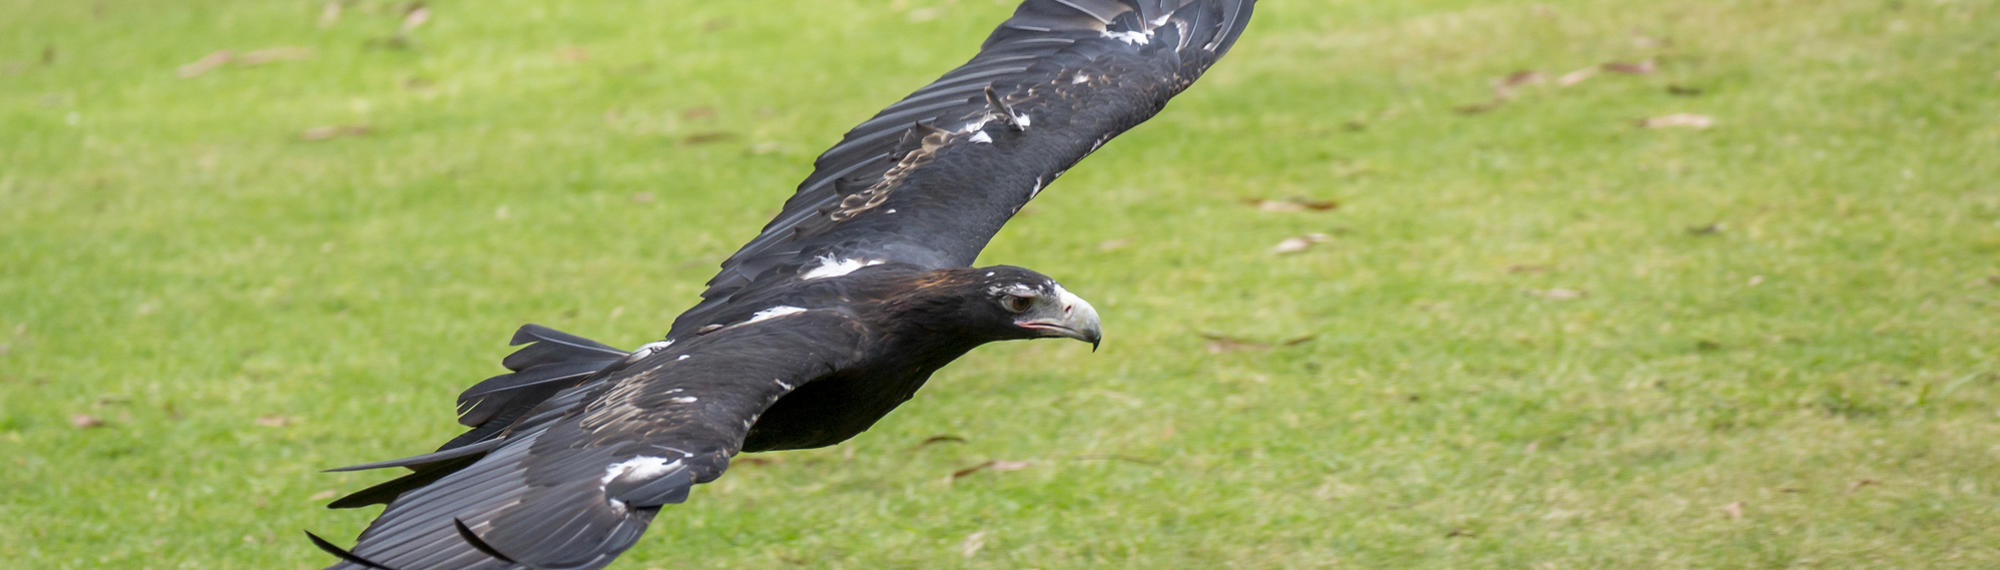 Wedge Tailed Eagle flying low along the grass with wings outstretched